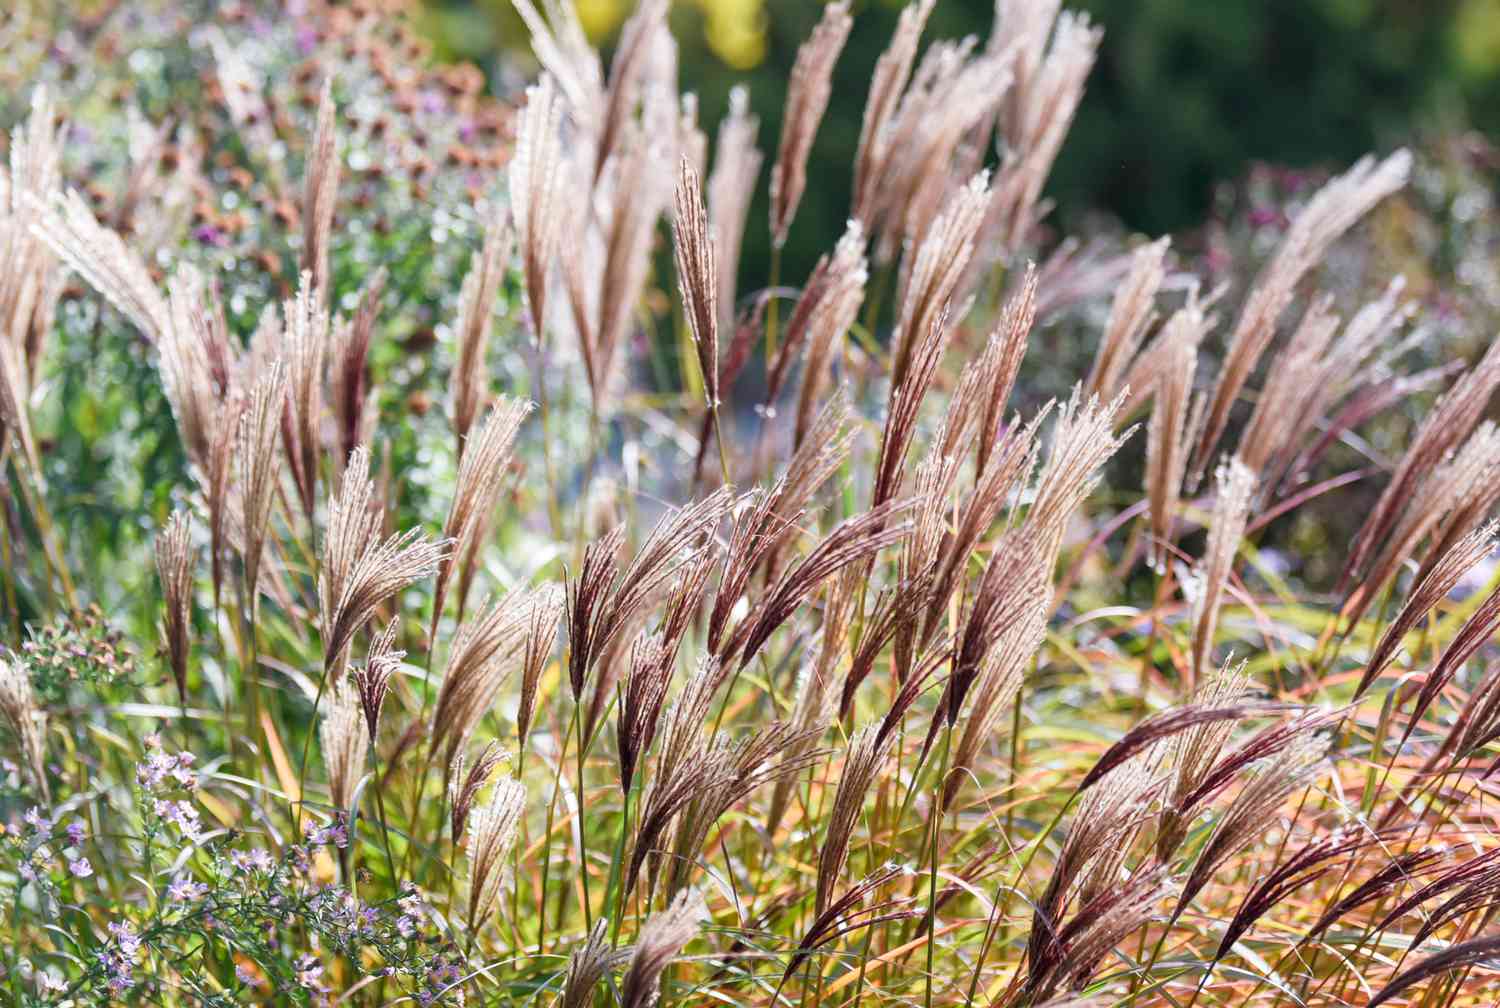 Silvergrass plumes with tan and brown feathery flowers in garden